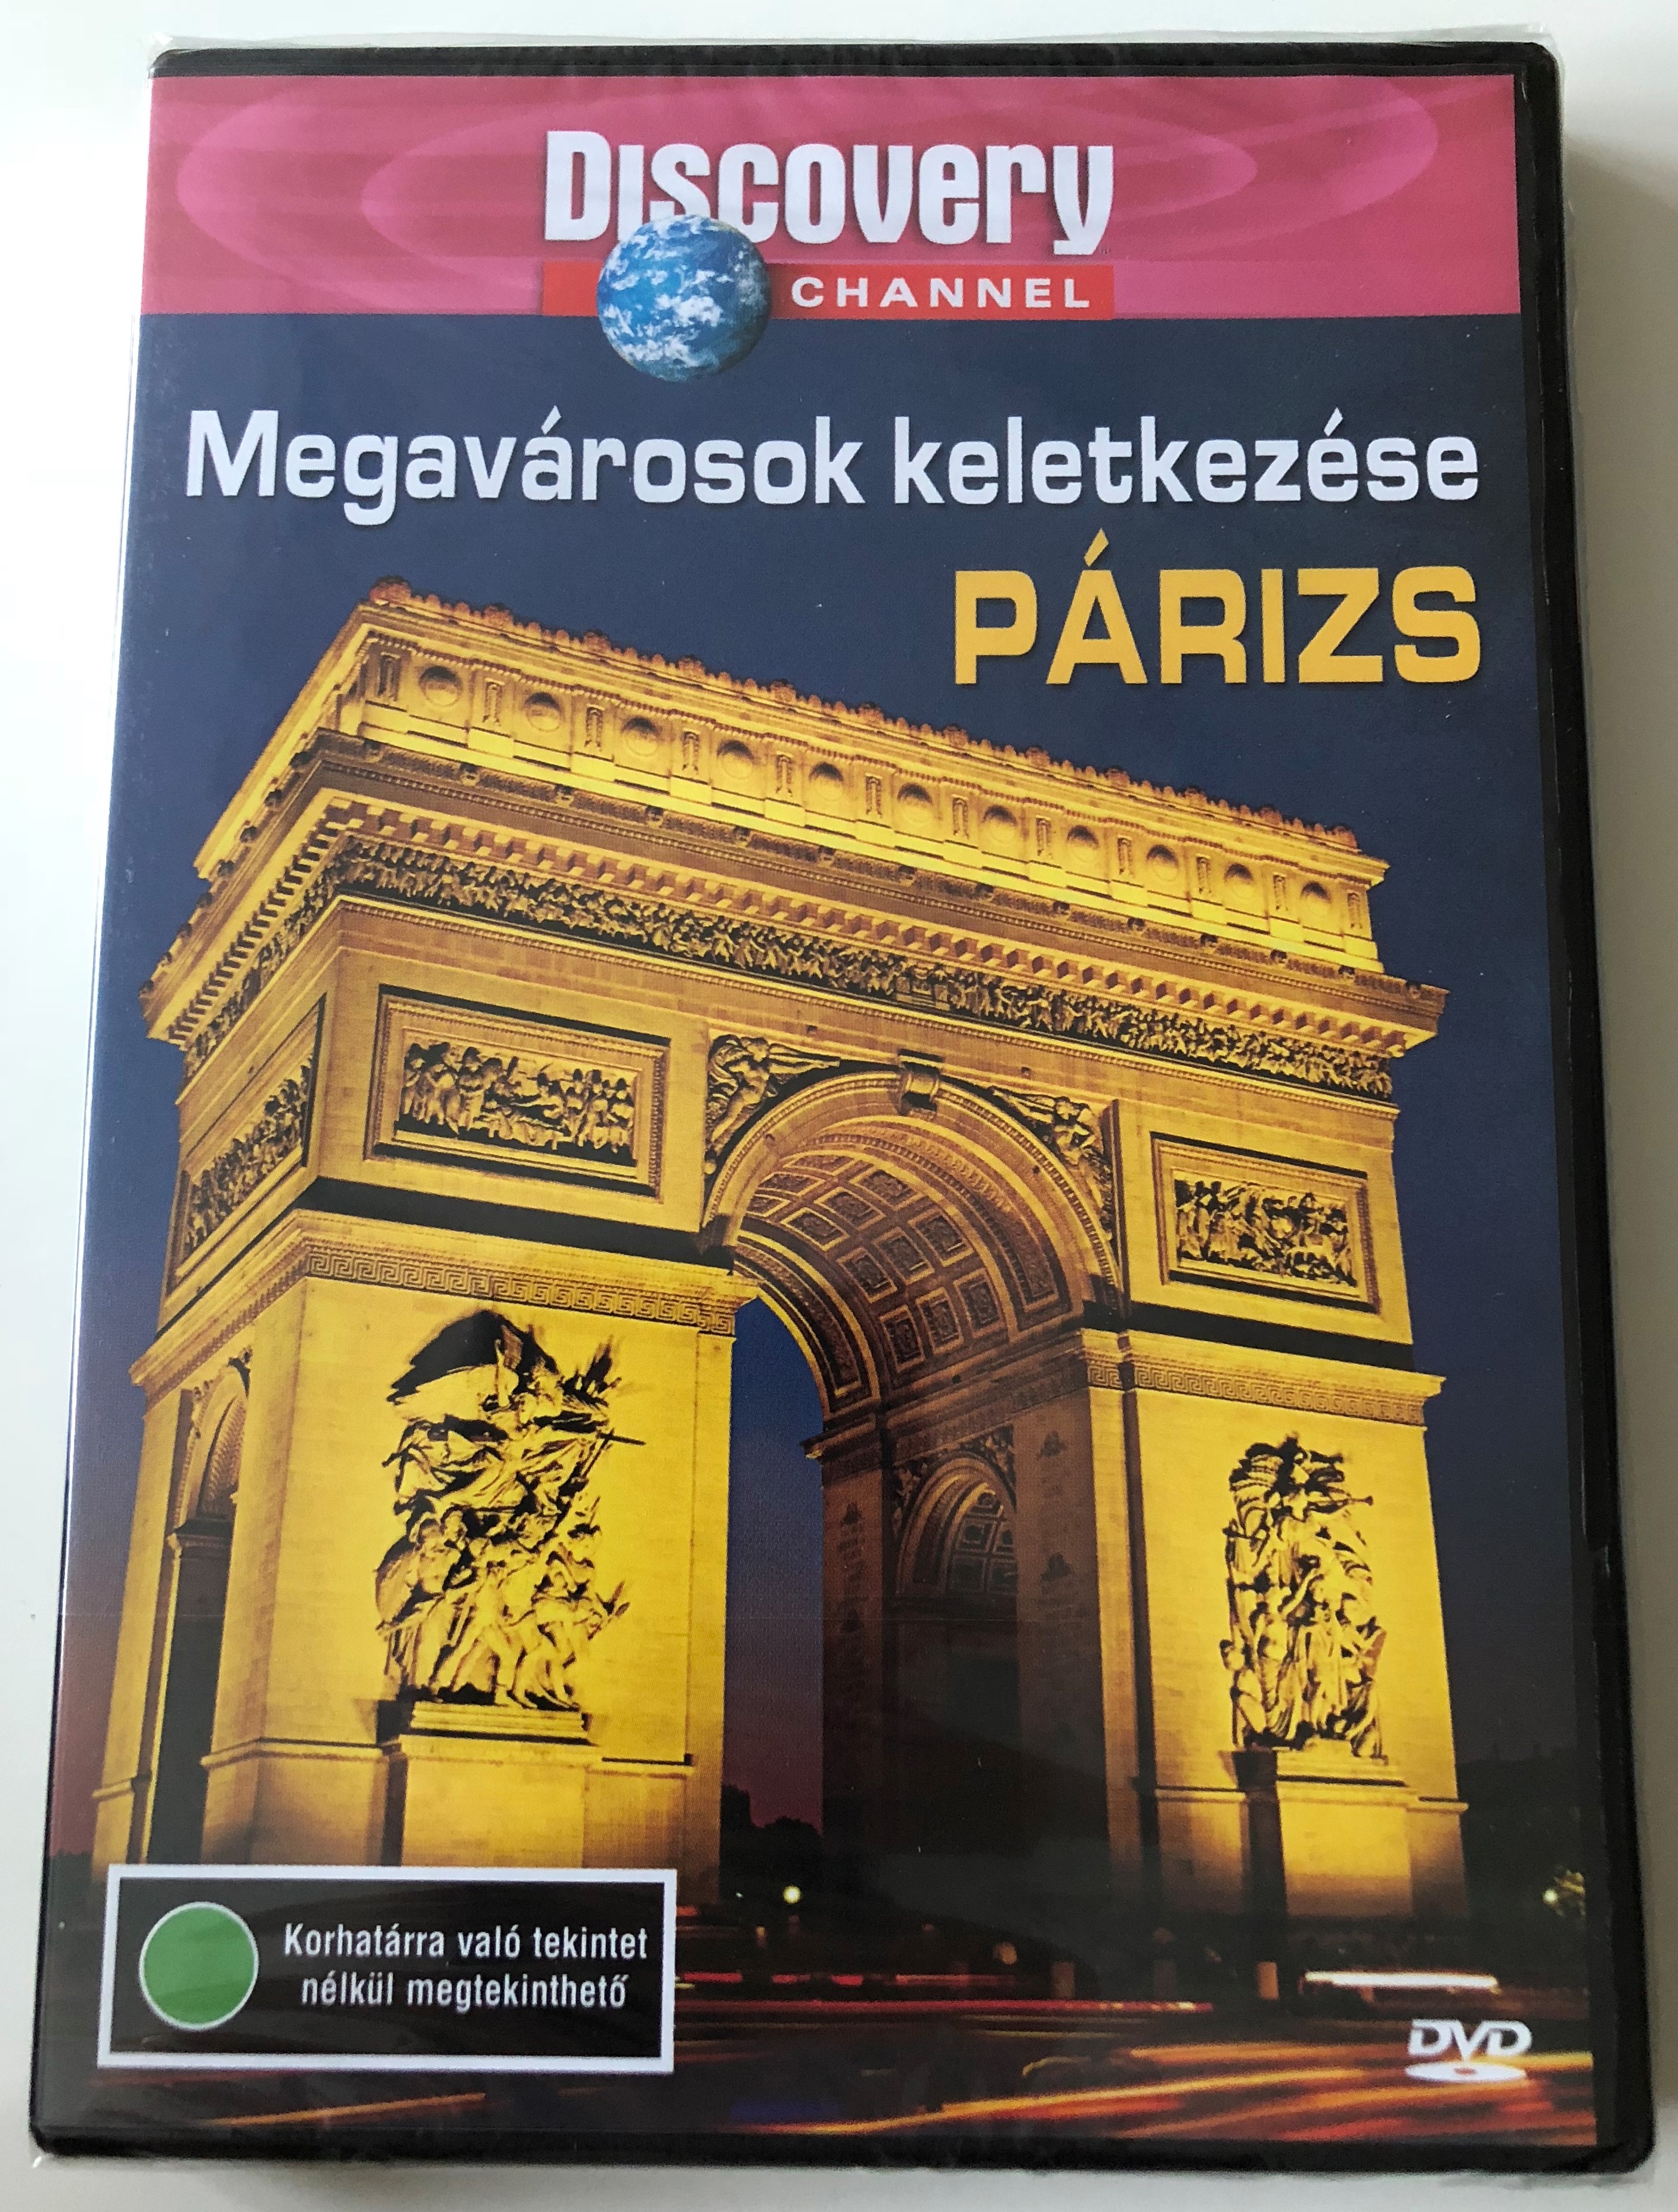 megav-rosok-keletkez-se-p-rizs-dvd-2003-we-built-this-city-paris-discovery-channel-series-produced-and-directed-by-jeremy-llewellyn-jones-1-.jpg